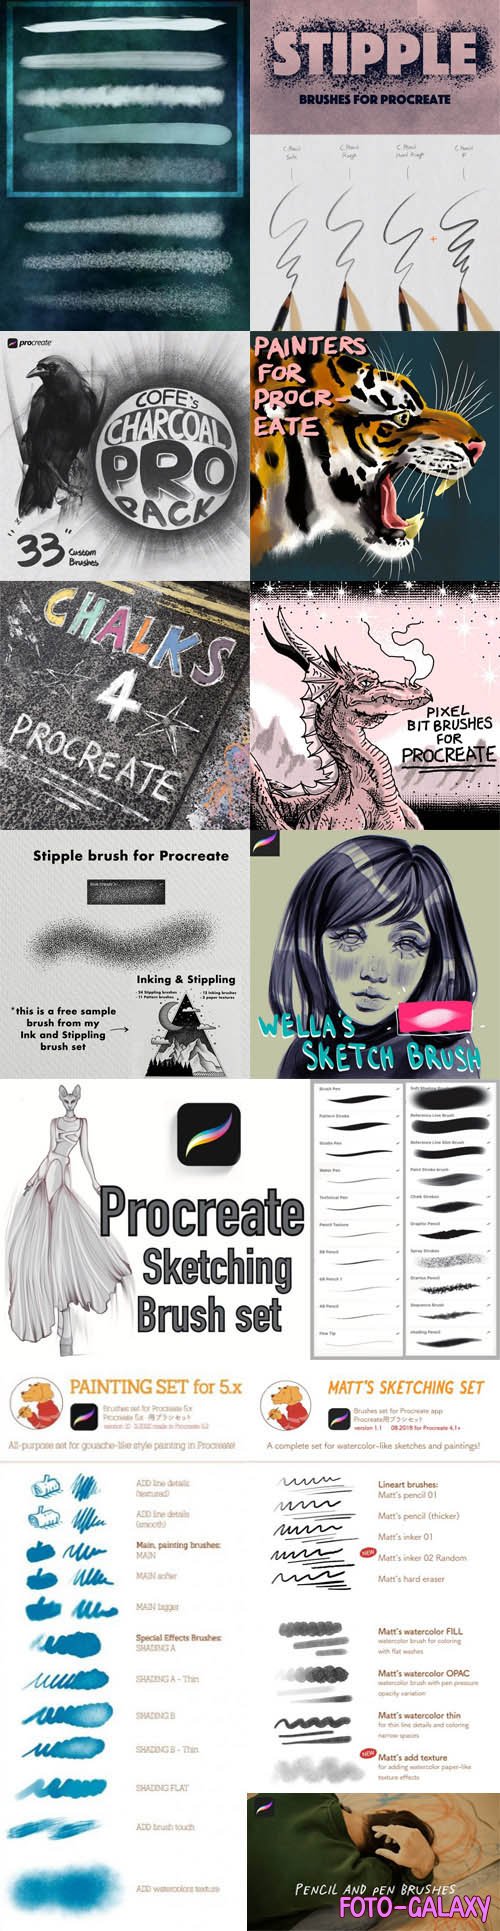 400+ Pencil & Pen (Sketching) Brushes for Procreate